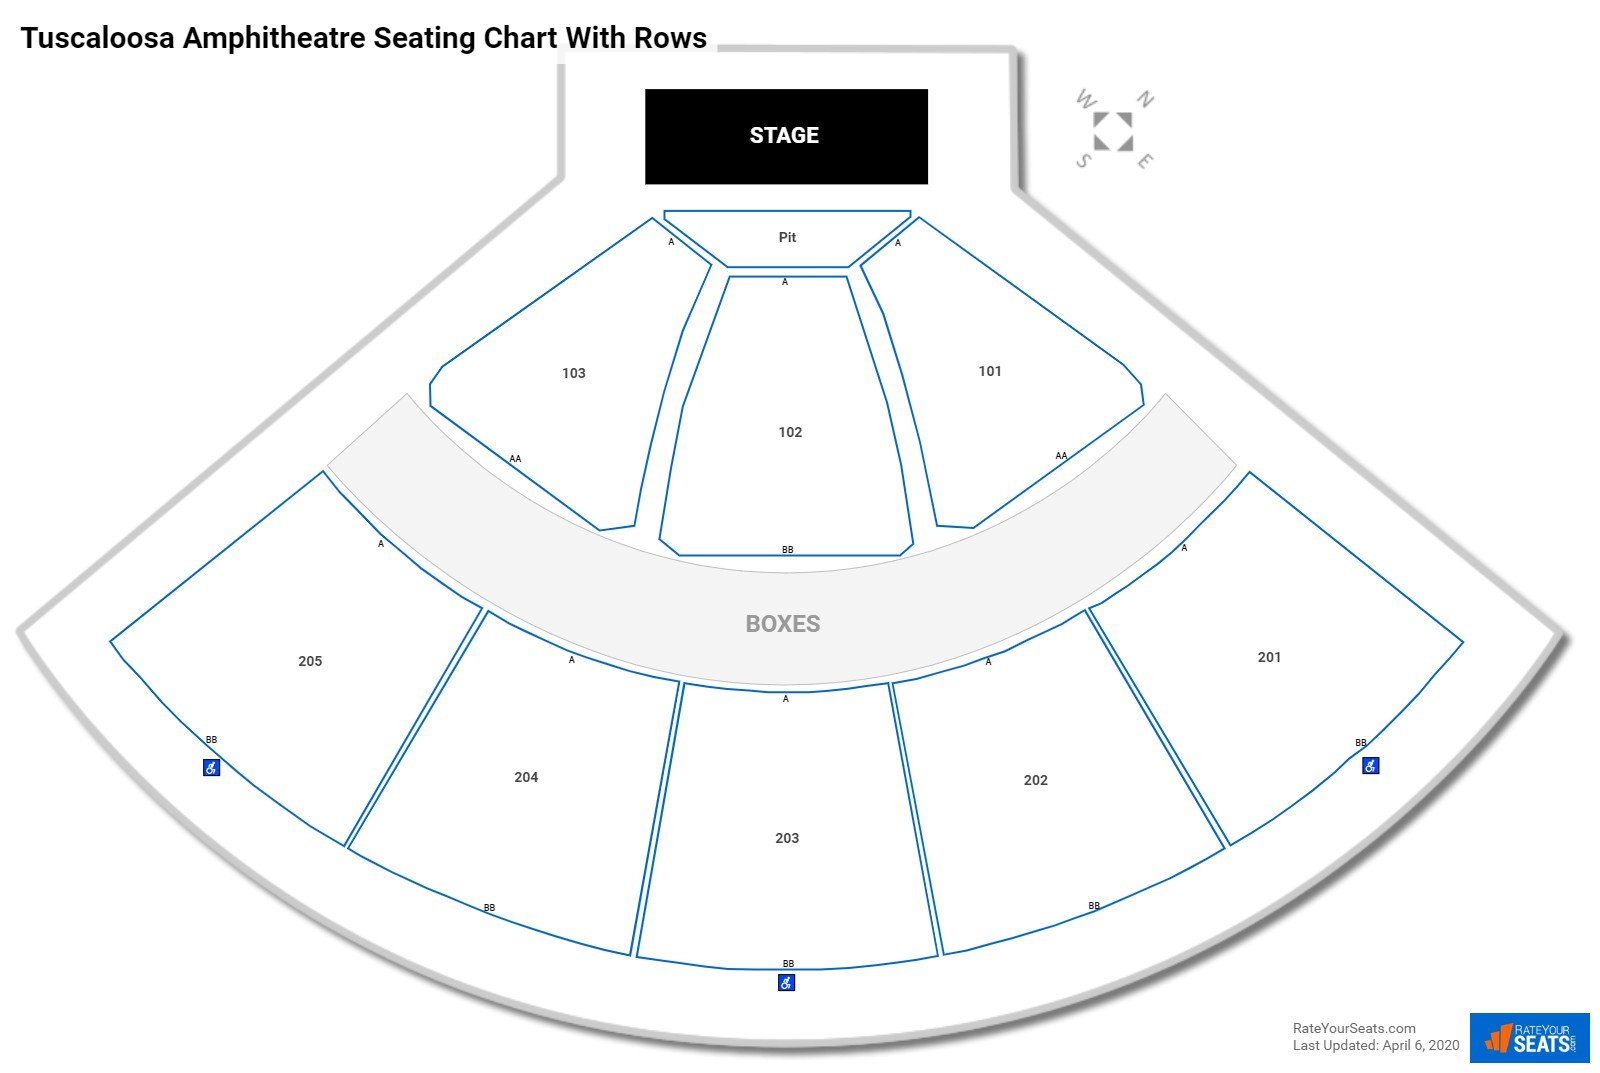 Tuscaloosa Amphitheatre seating chart with row numbers